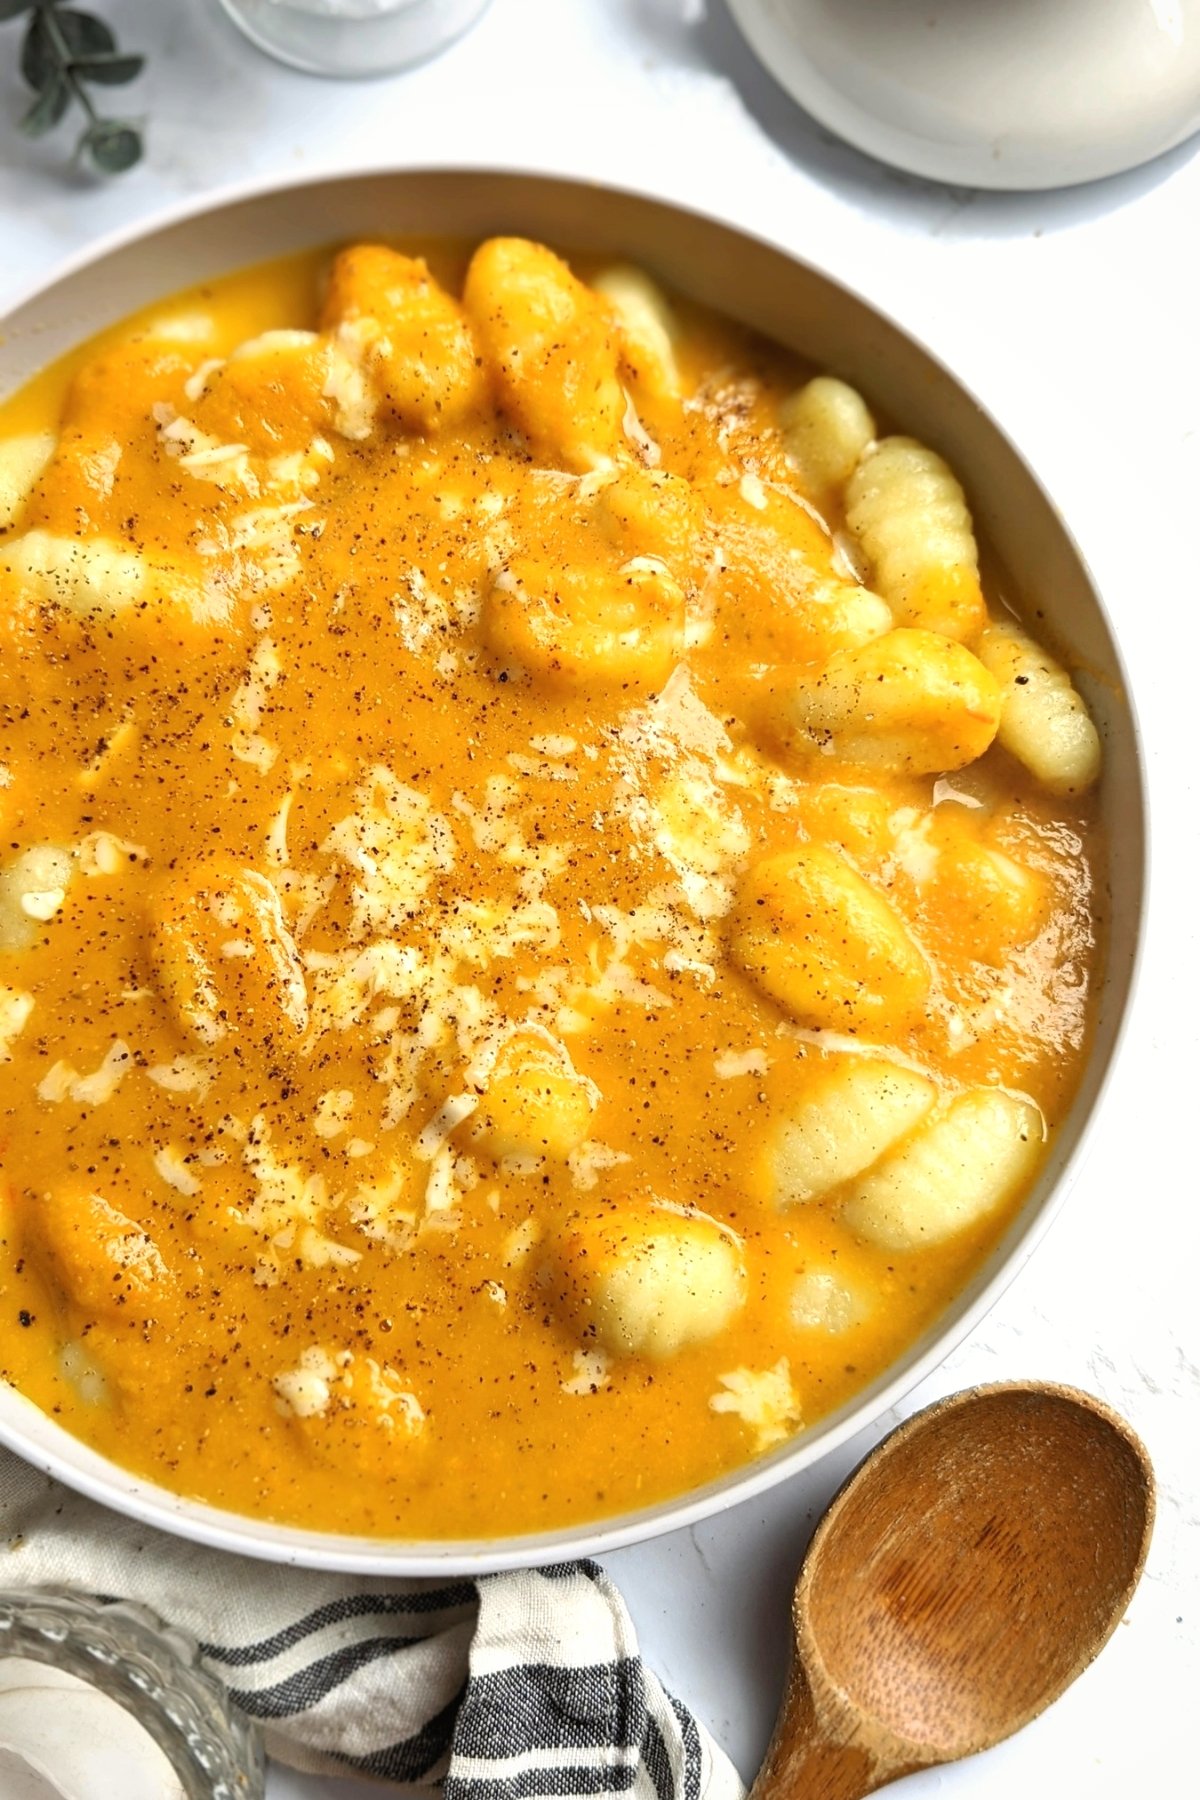 pumpkin gnocchi recipe healthy pumpkin sauce for fall gnocchi recipes healthy autumn pasta ideas for dinner with canned pumpkin